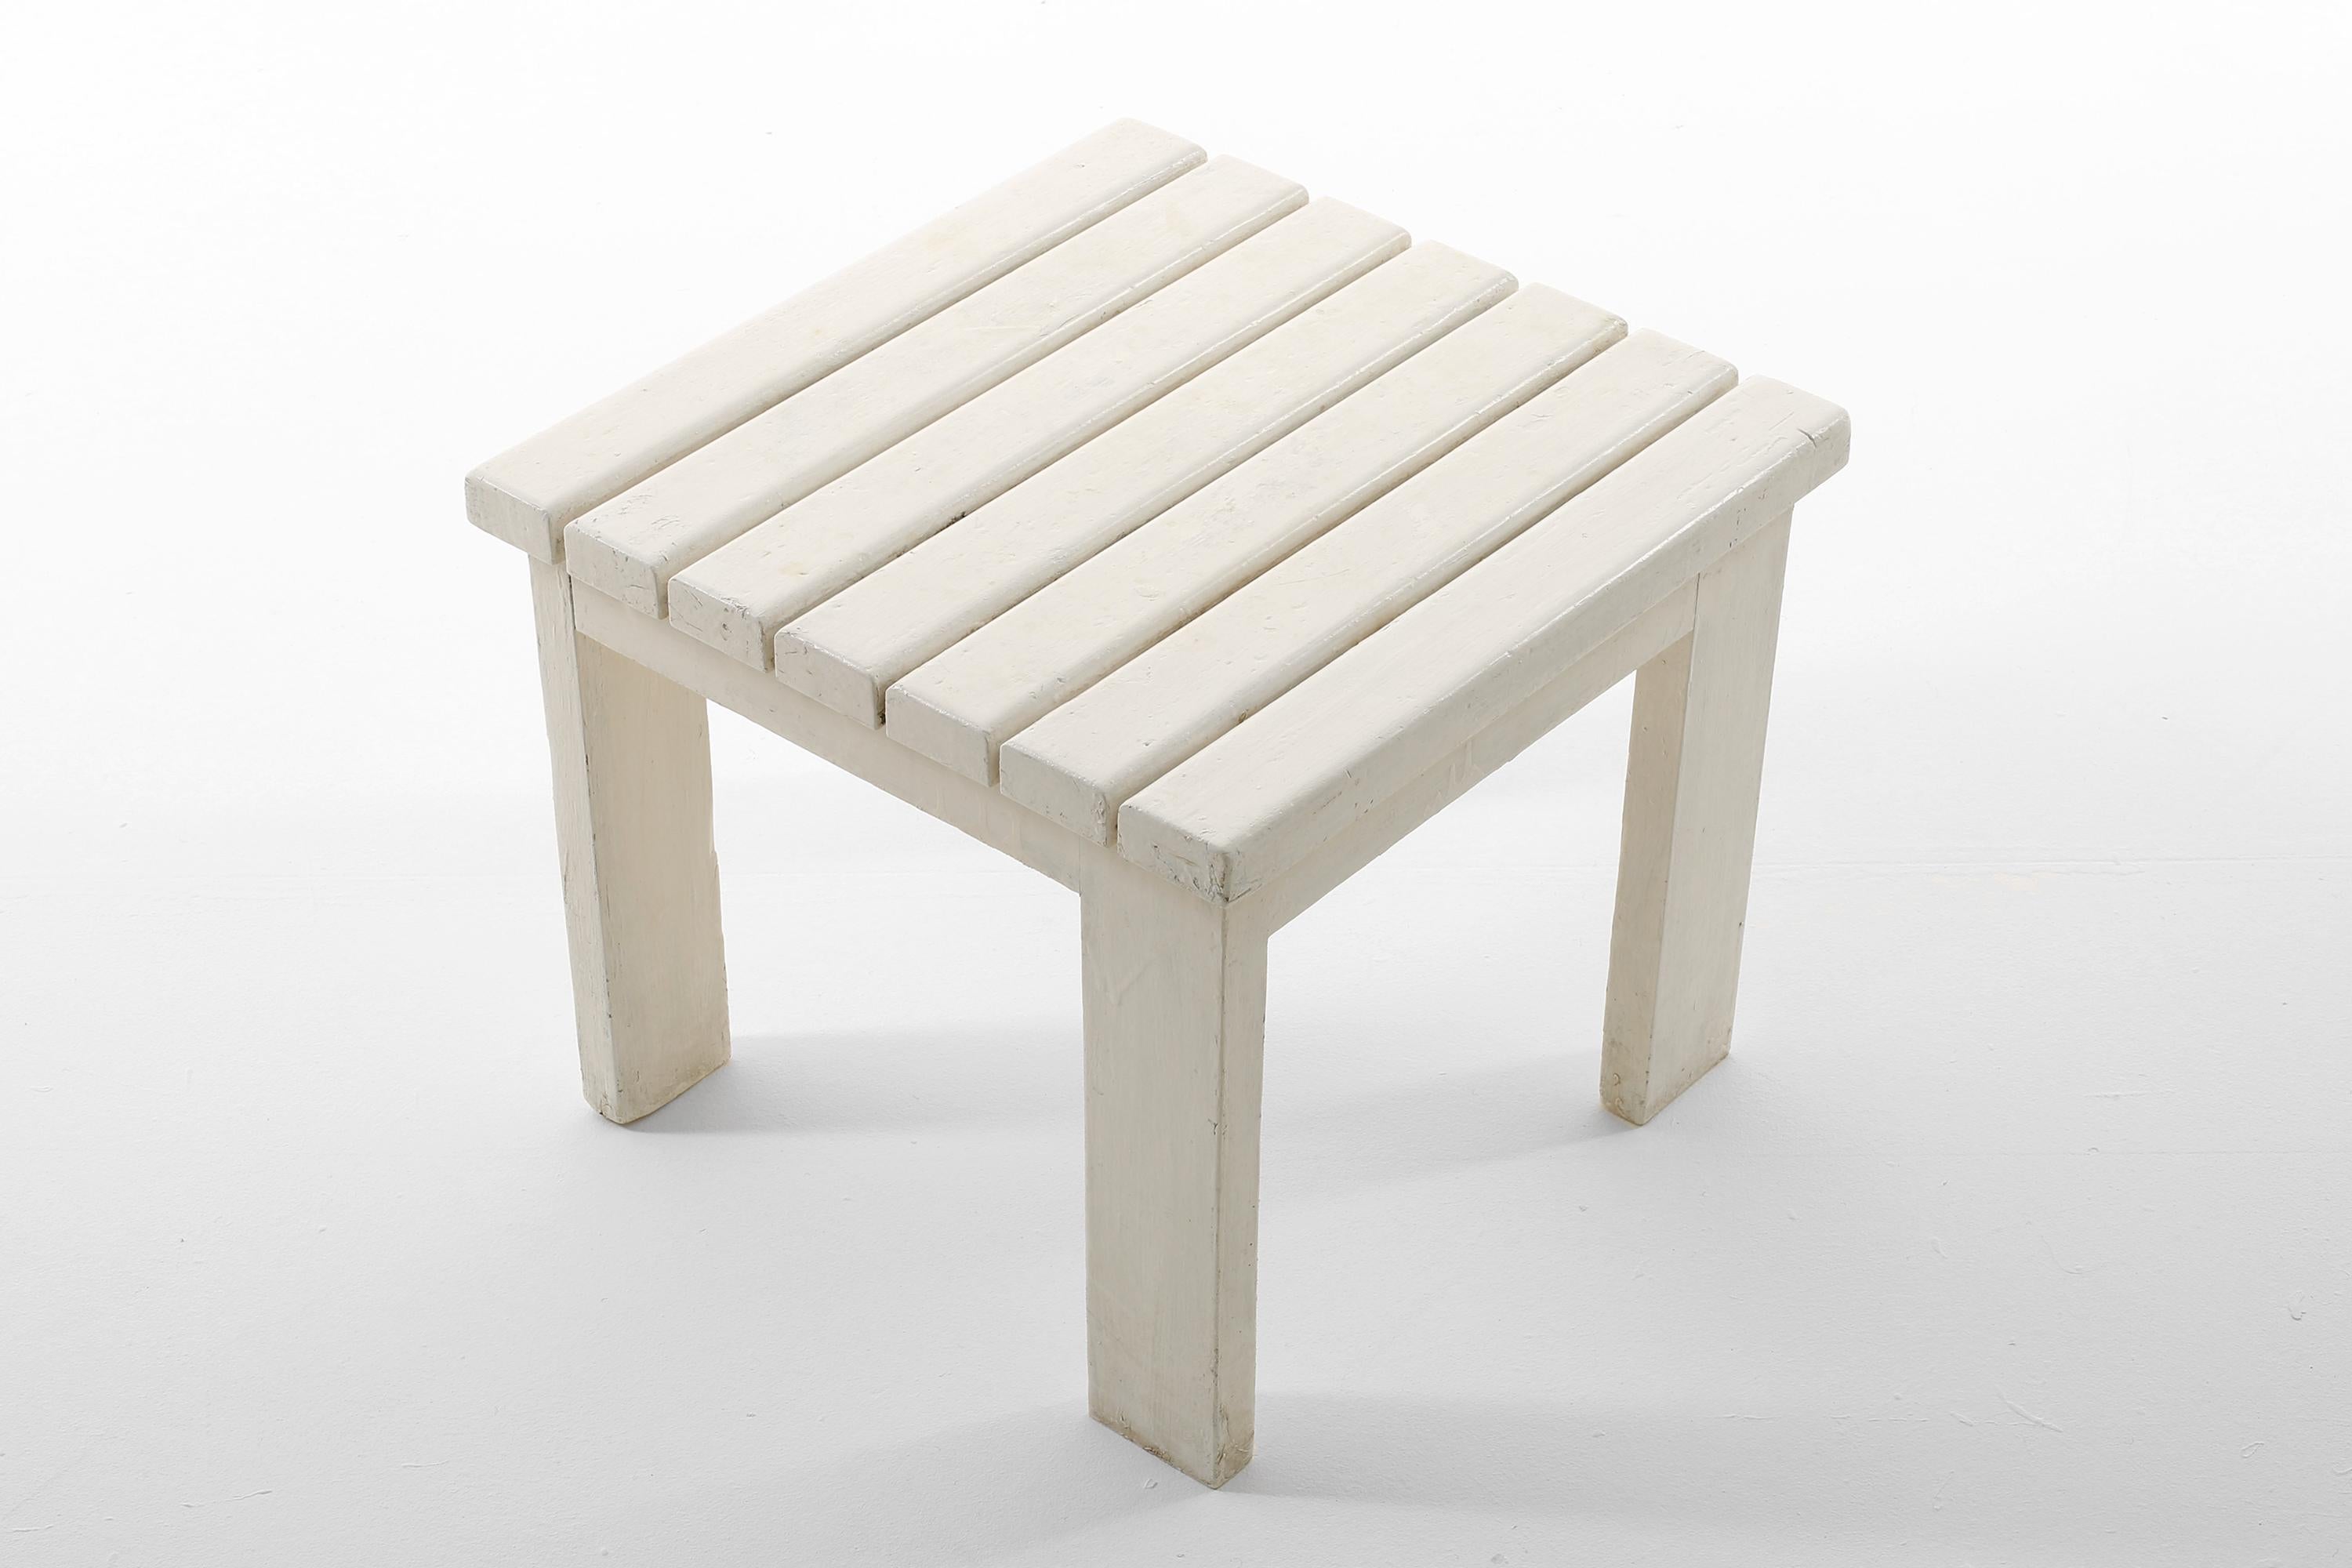 A modernist white painted wooden side table with slatted top and offset legs by Jacques Quinet. Probably an outdoor or poolside table, privately commissioned for a villa in Martigues. French, 1967.